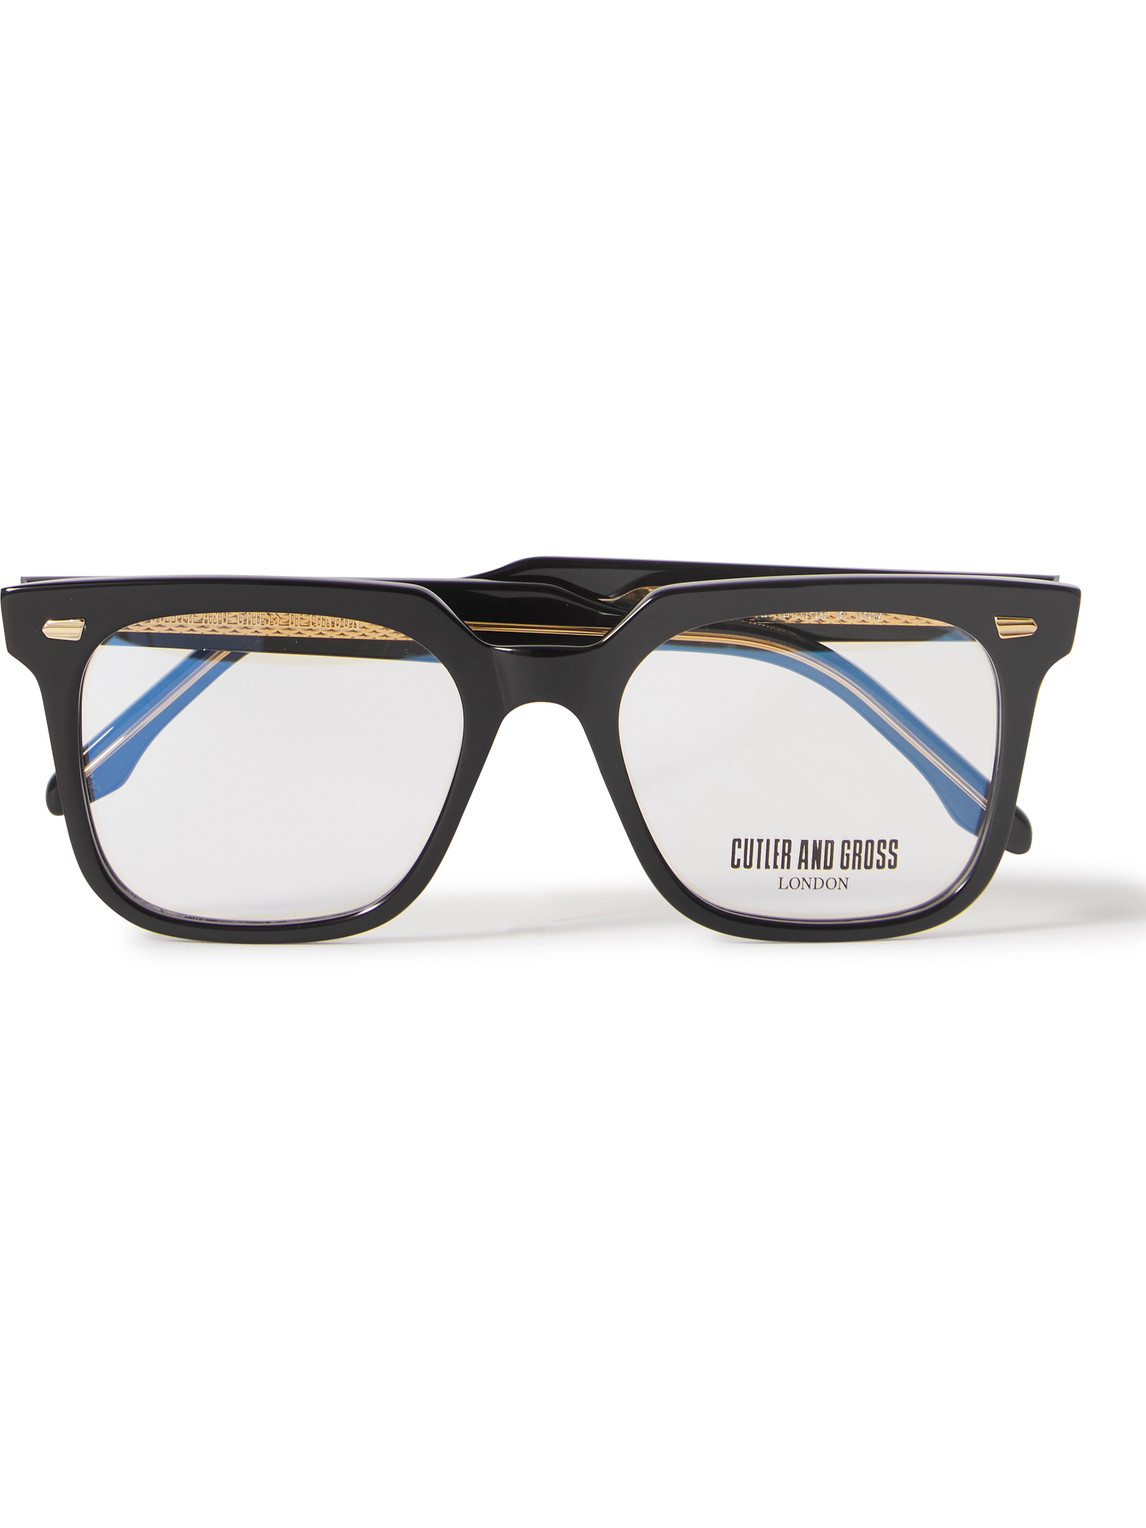 Cutler And Gross 1387 Square-frame Acetate Optical Glasses In Black